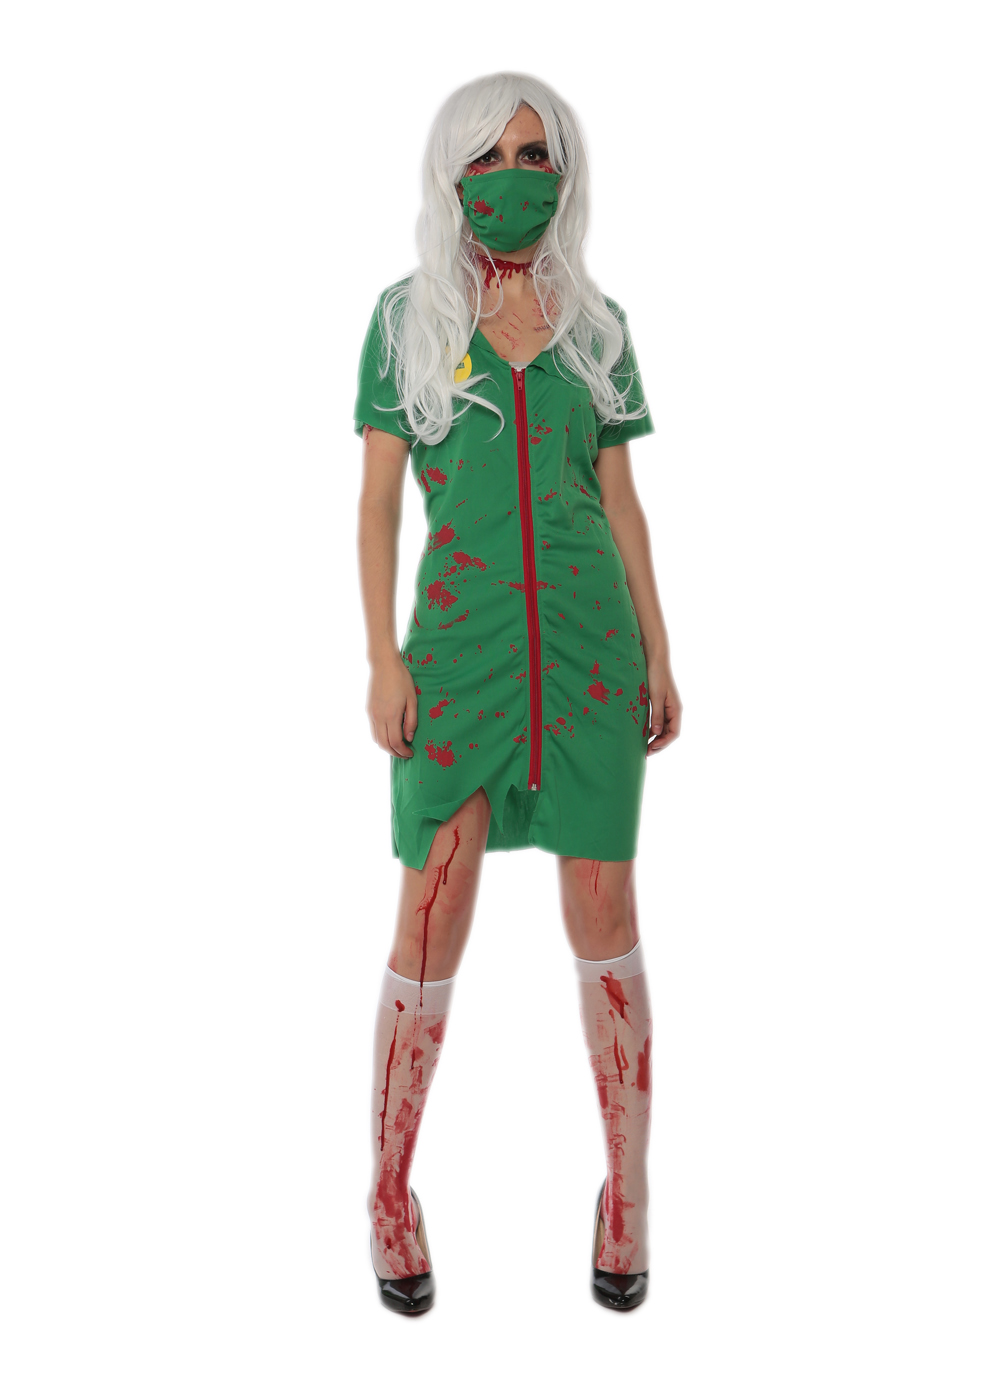 F1720 halloween green zombie costume,it comes with dress,mask